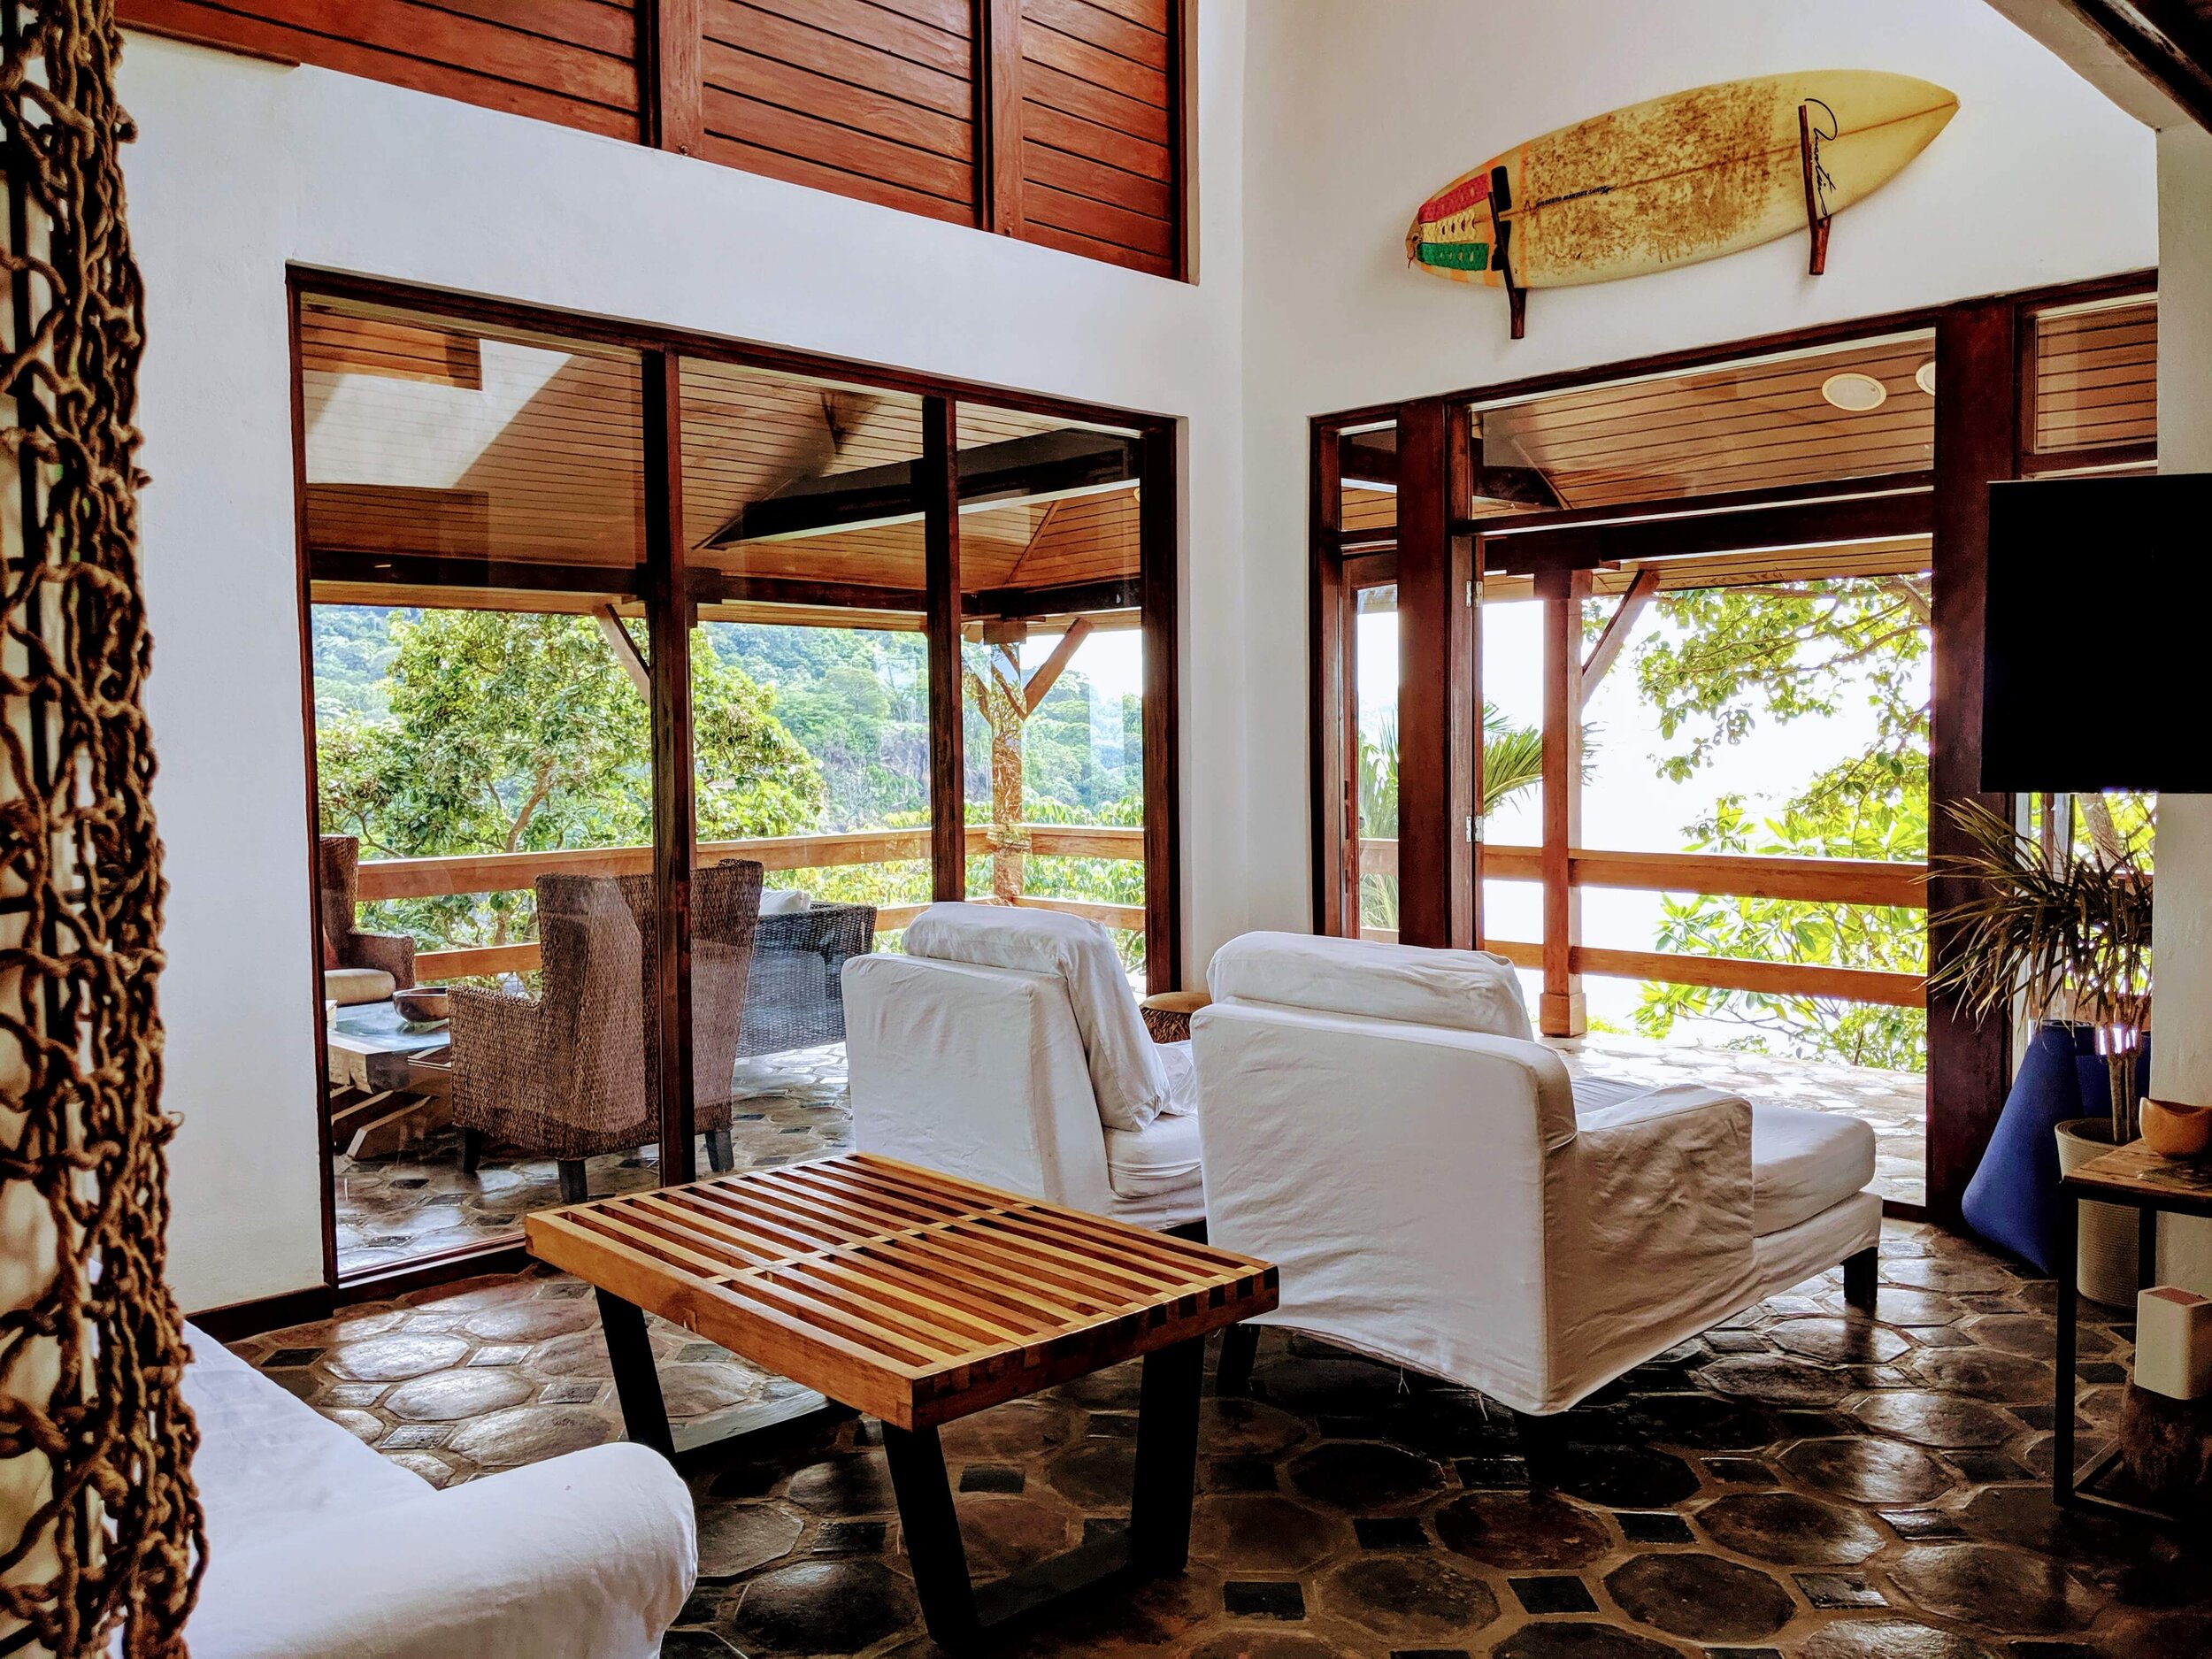 Living room at Shankton House, accommodation for 8 people Tola surf beaches.jpg